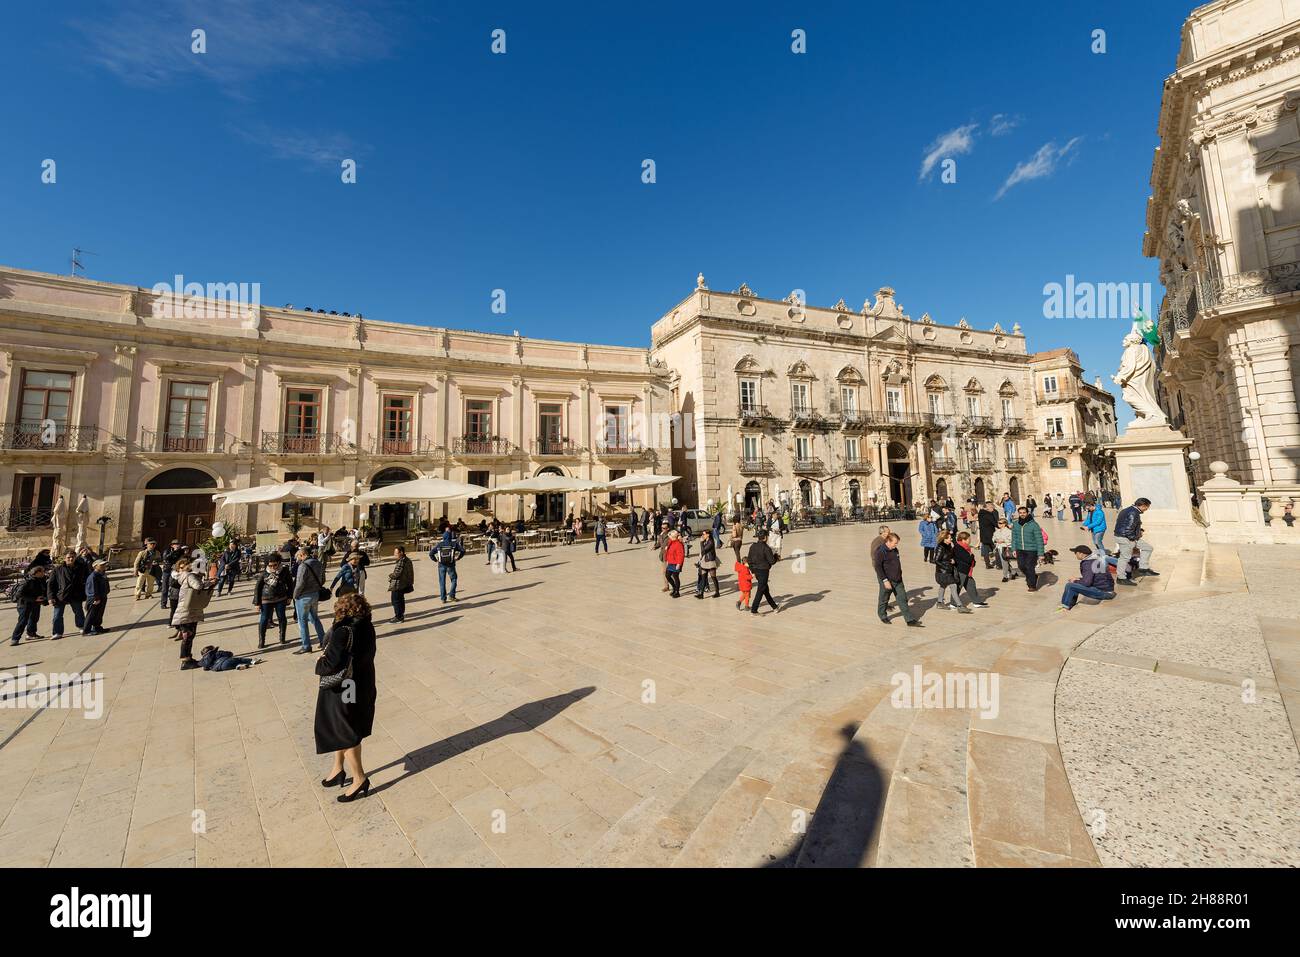 Tourists visit the Cathedral Square (Piazza del Duomo) in the island of Ortigia, historic center of Siracusa, Sicily island, Italy, Europe. Stock Photo